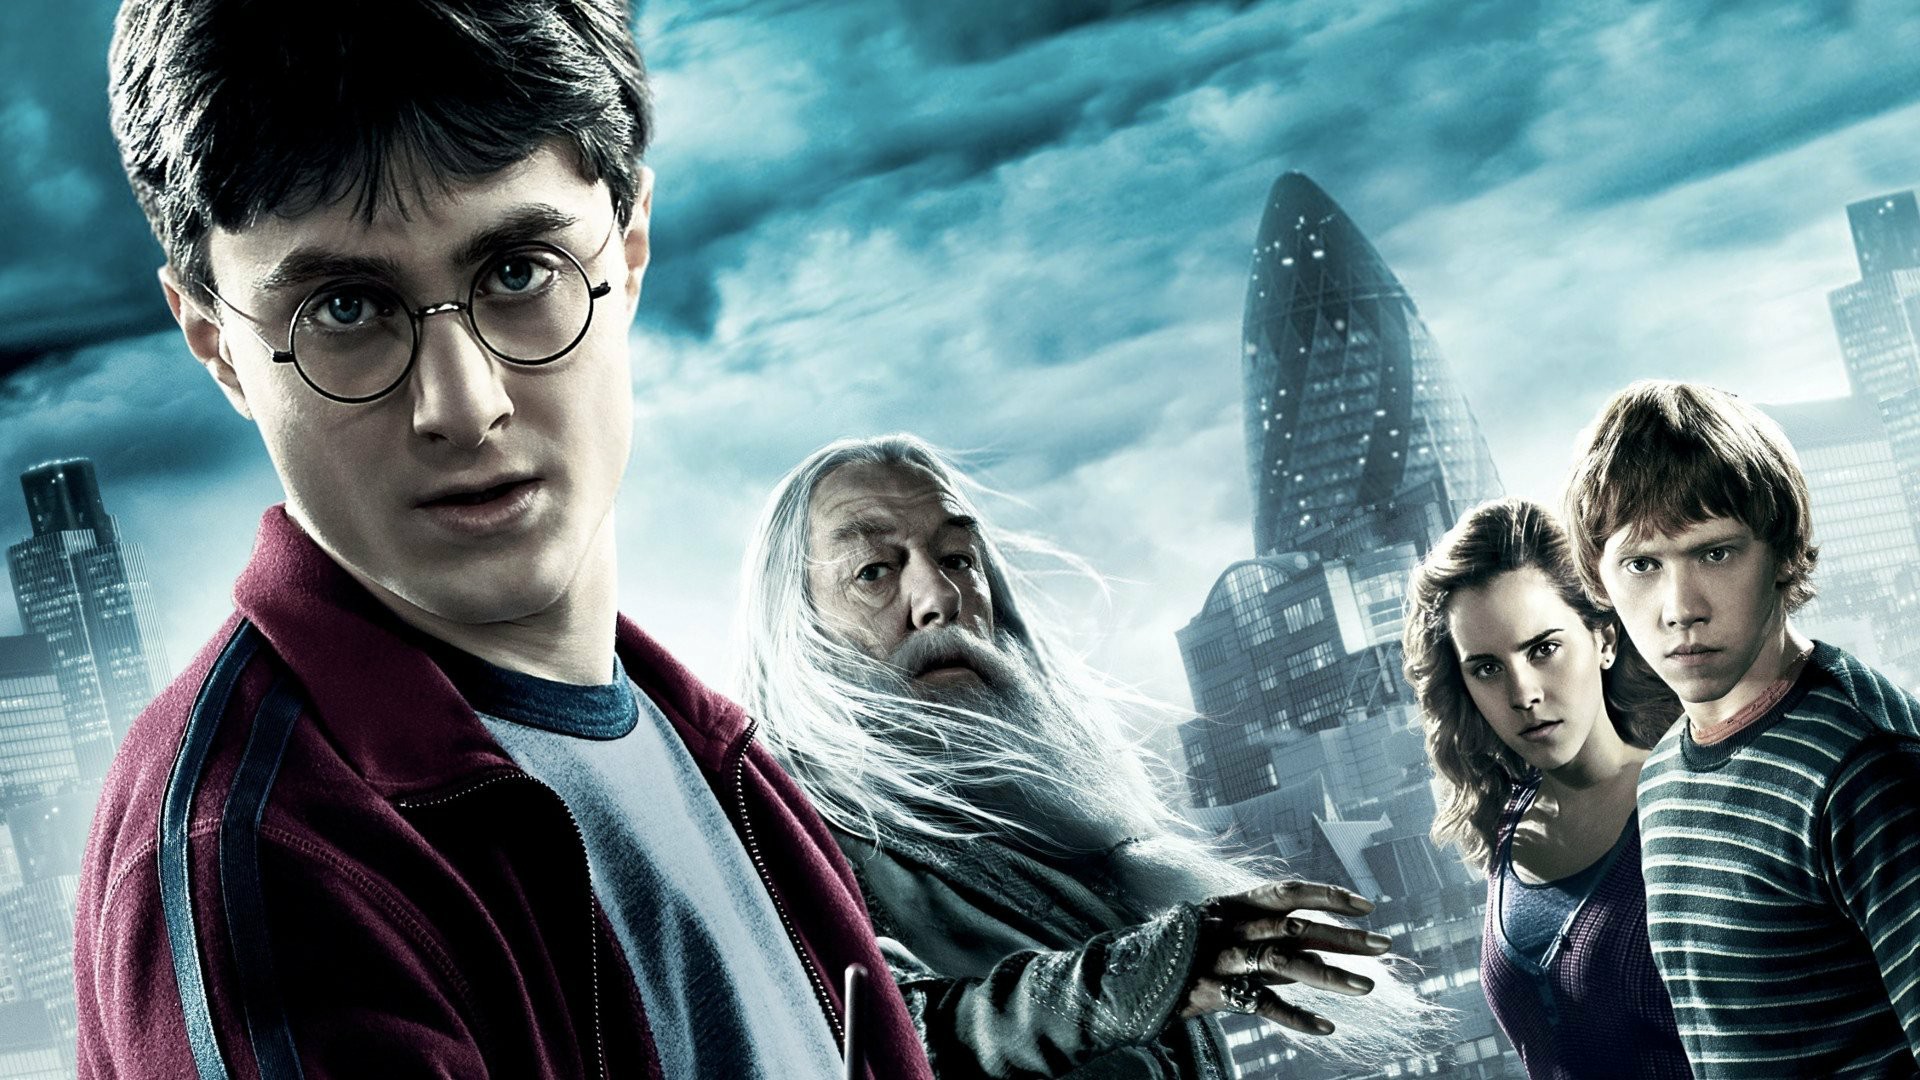 harry potter and the half blood prince